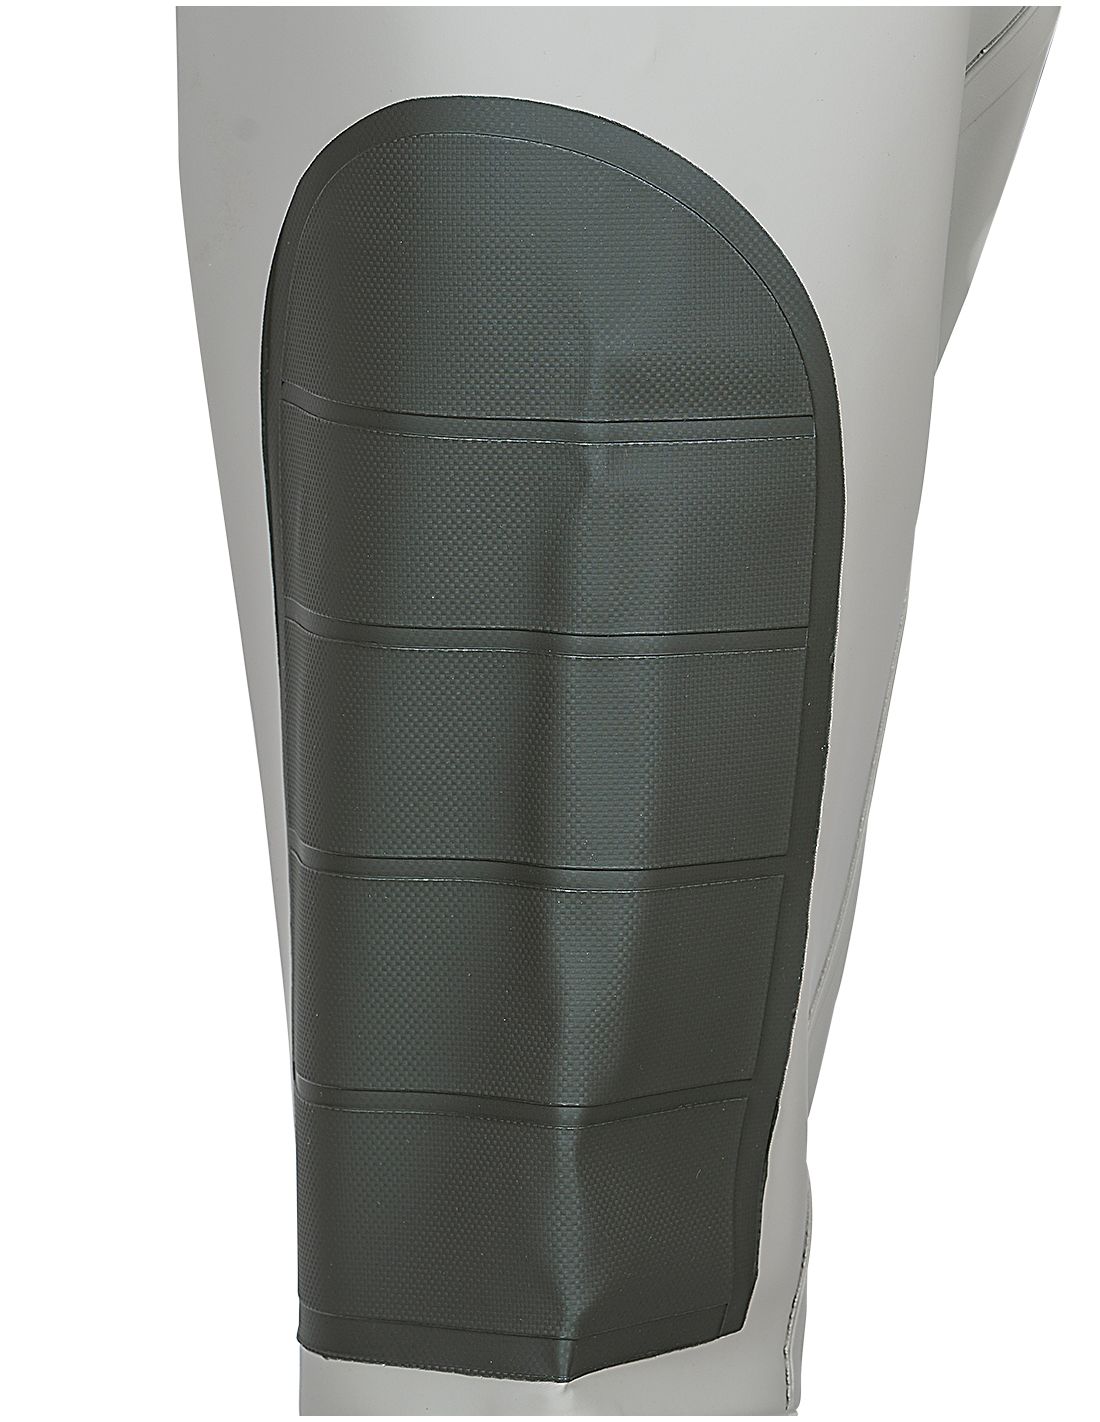 Thigh Waders PREMIUM (Reinforced) - PROS